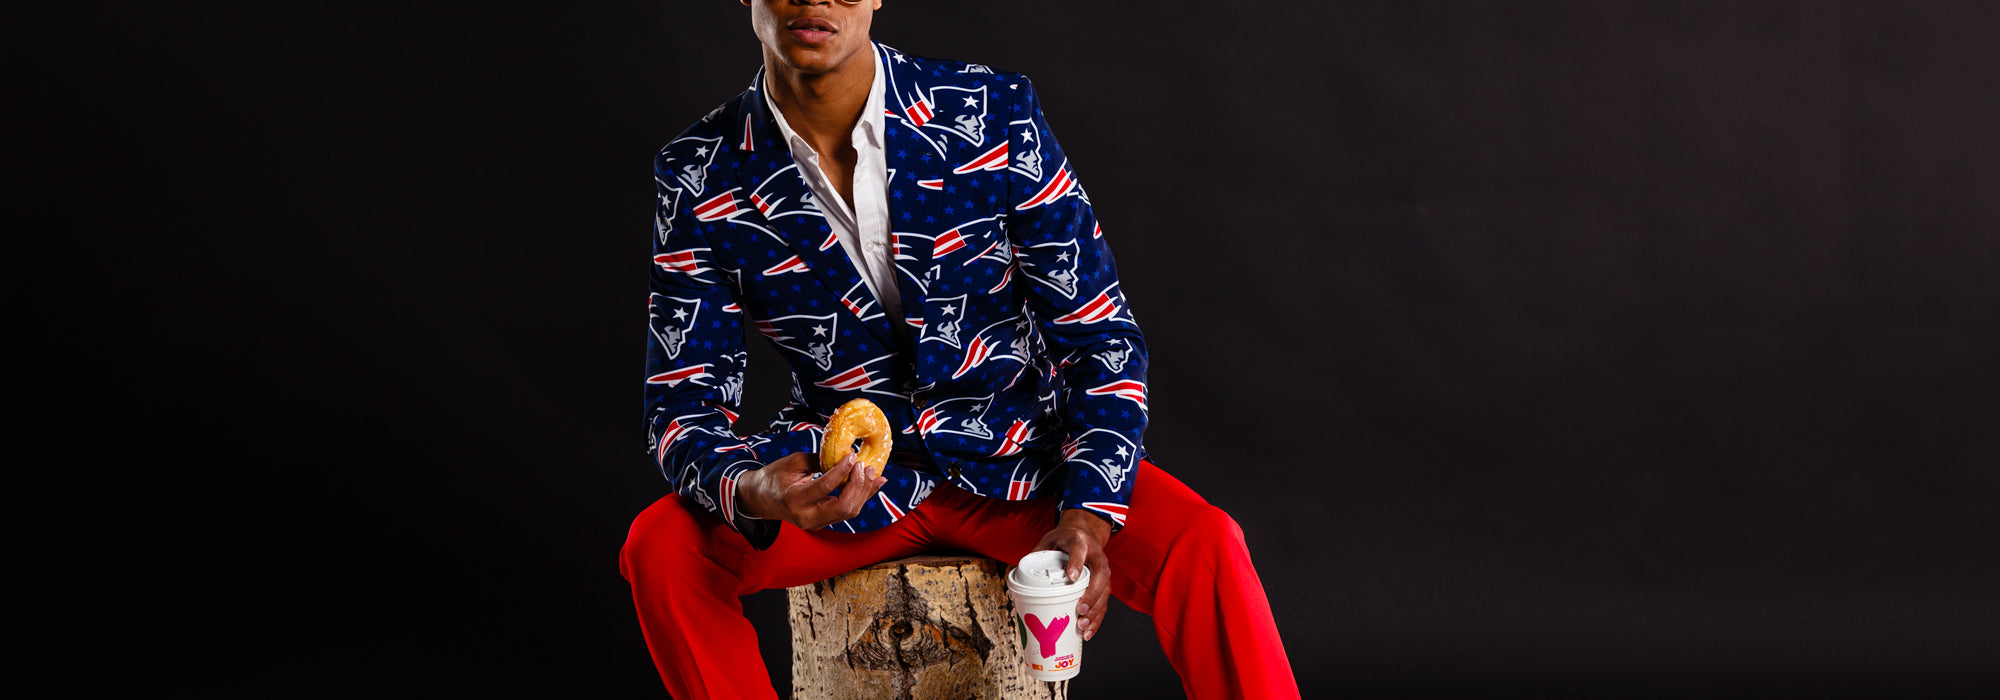 The First ever Buffalo Bills Suit, Get your NFL suits and other outrageous  clothing at Shinesty.com